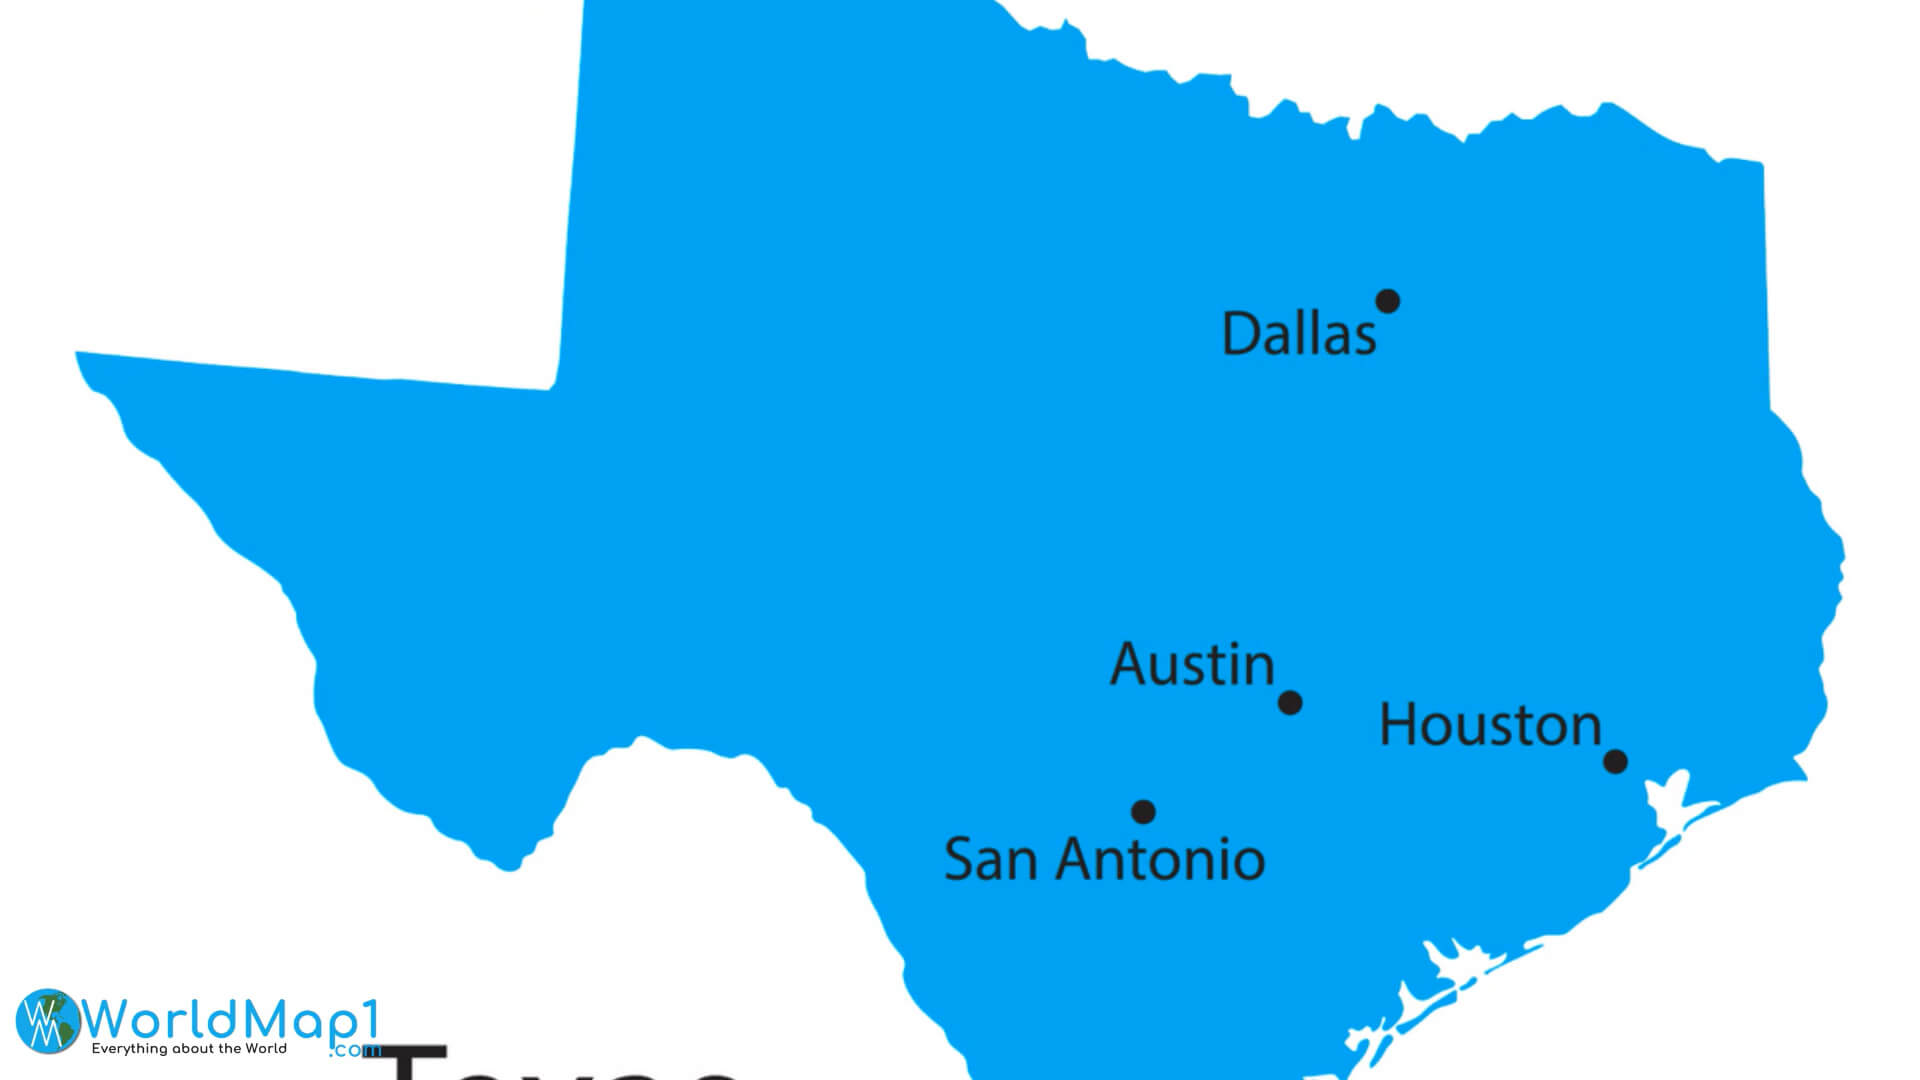 Map of Texas and Largest Cities